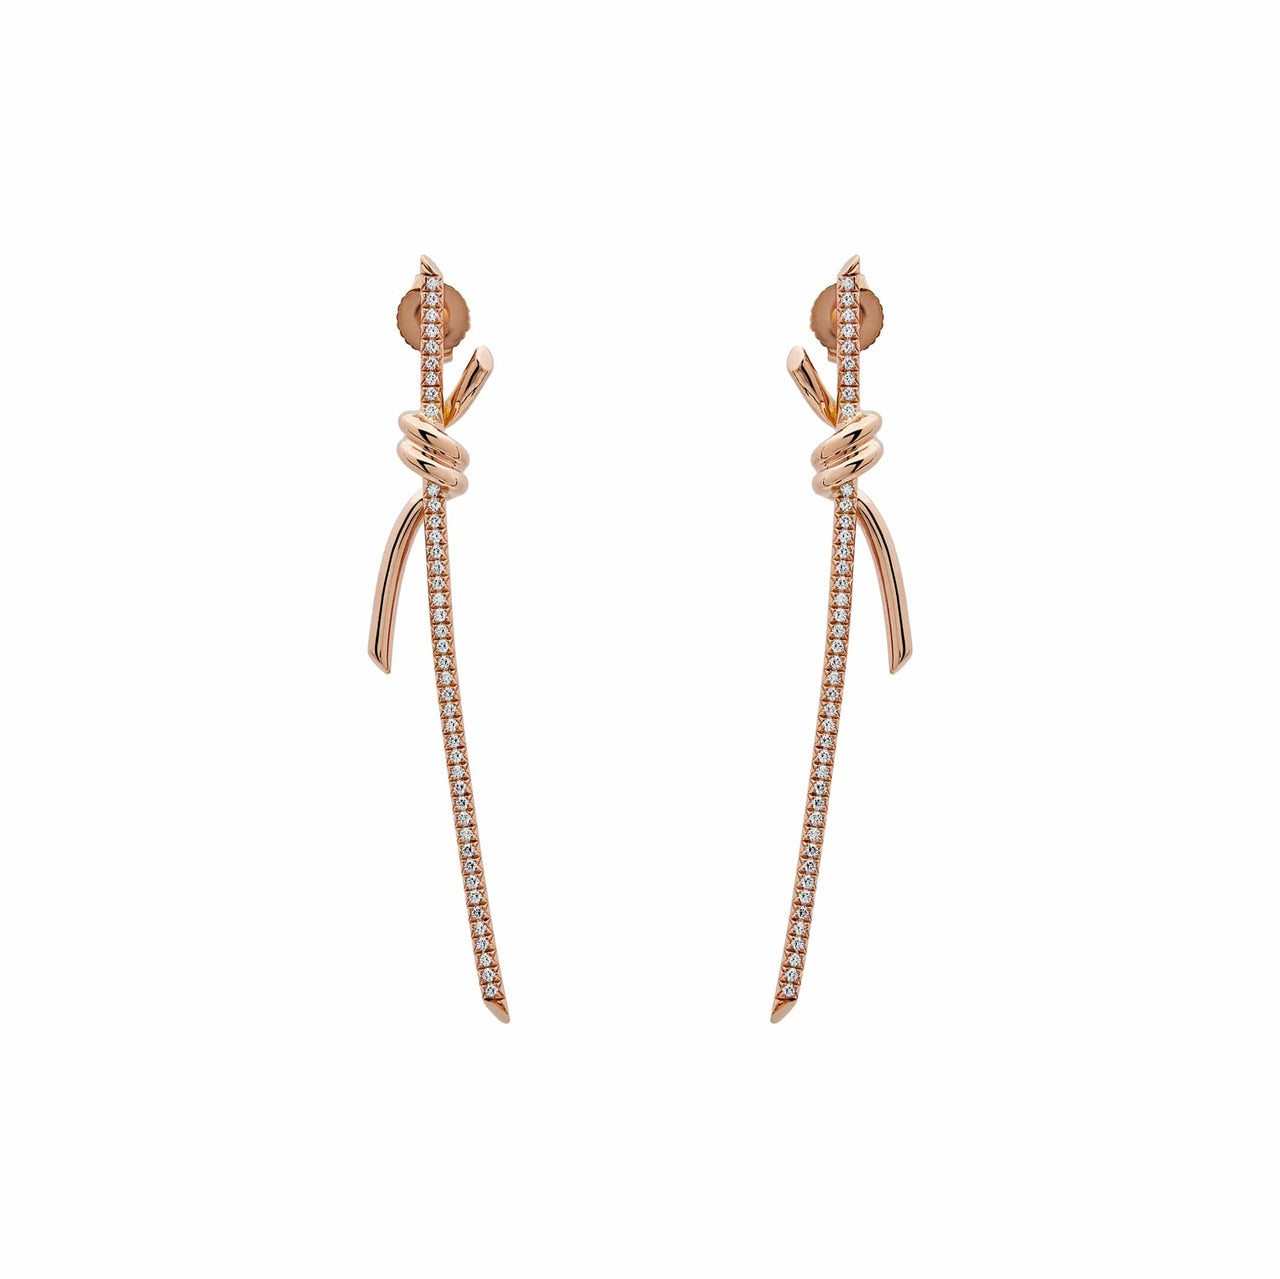 Tiffany & Co. Knot Drop Earrings in Rose Gold with Diamonds 69526128